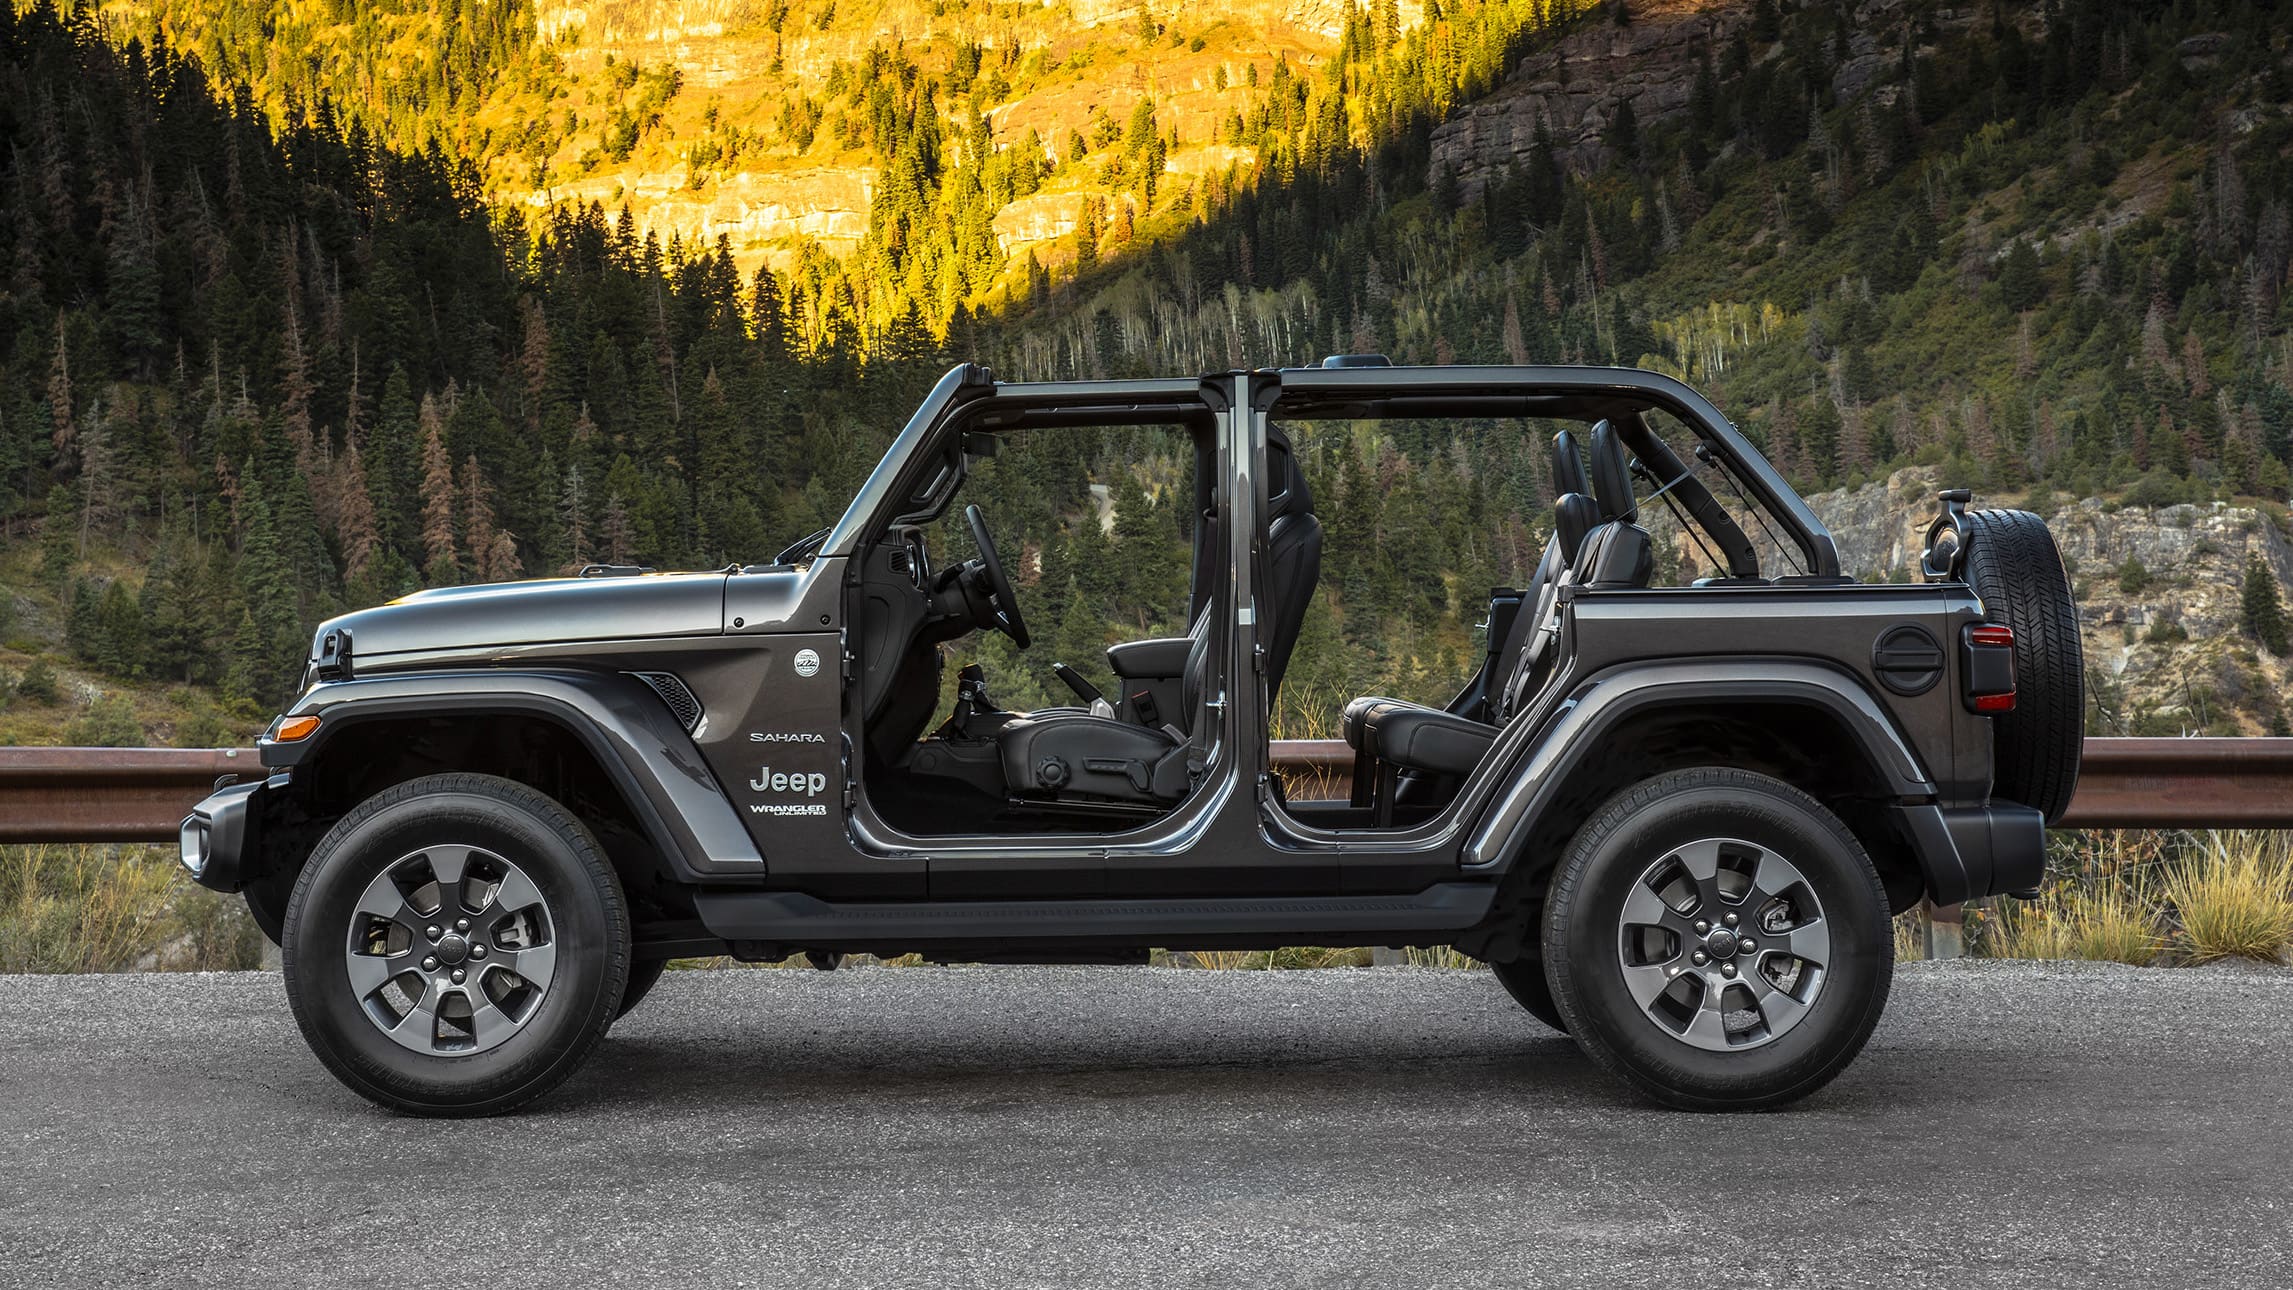 2020 Jeep Wrangler Review | Price, specs, features and photos | Autoblog